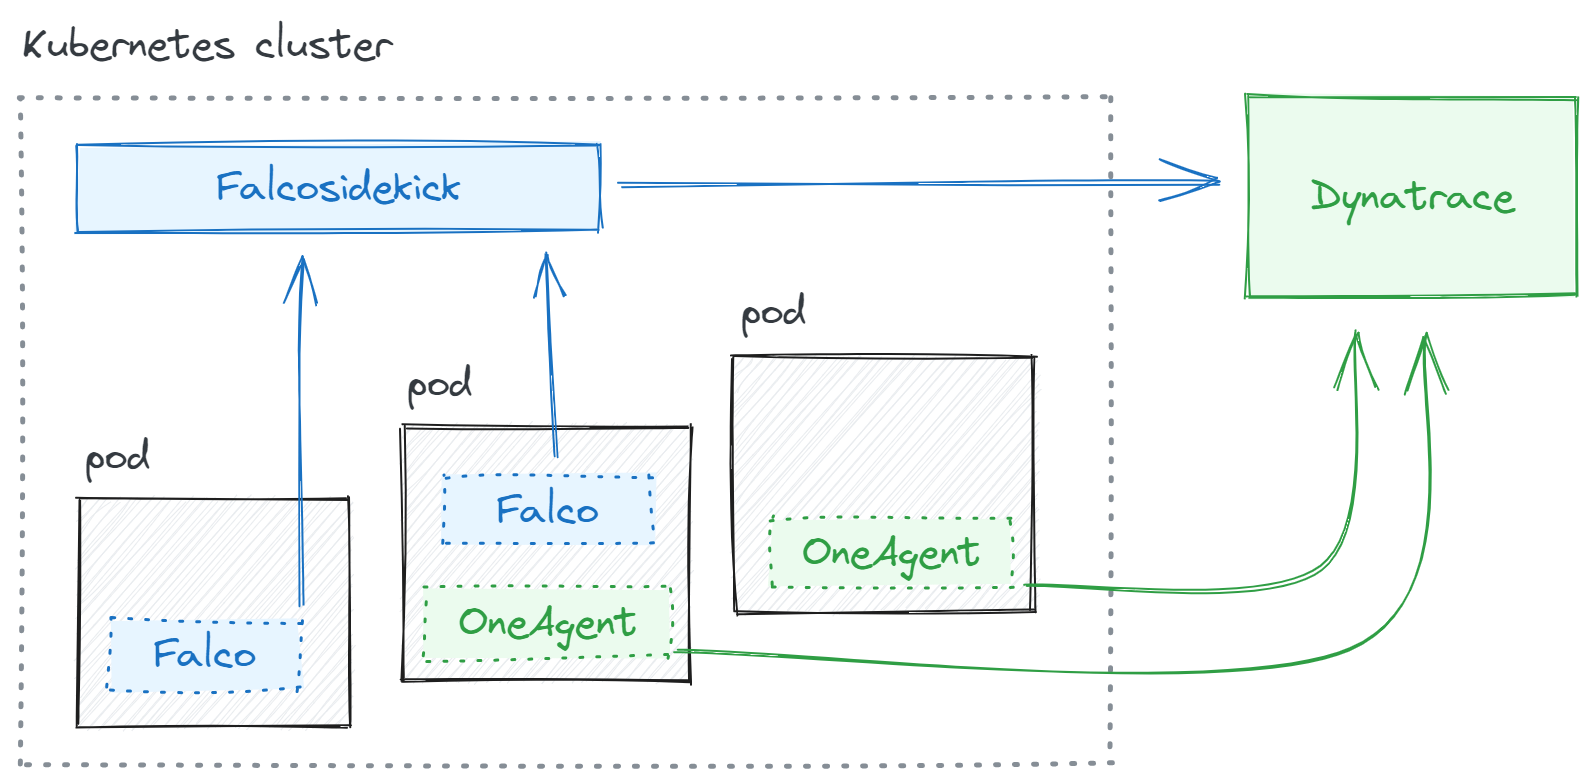 threat hunting architecture with Dynatrace and Falco